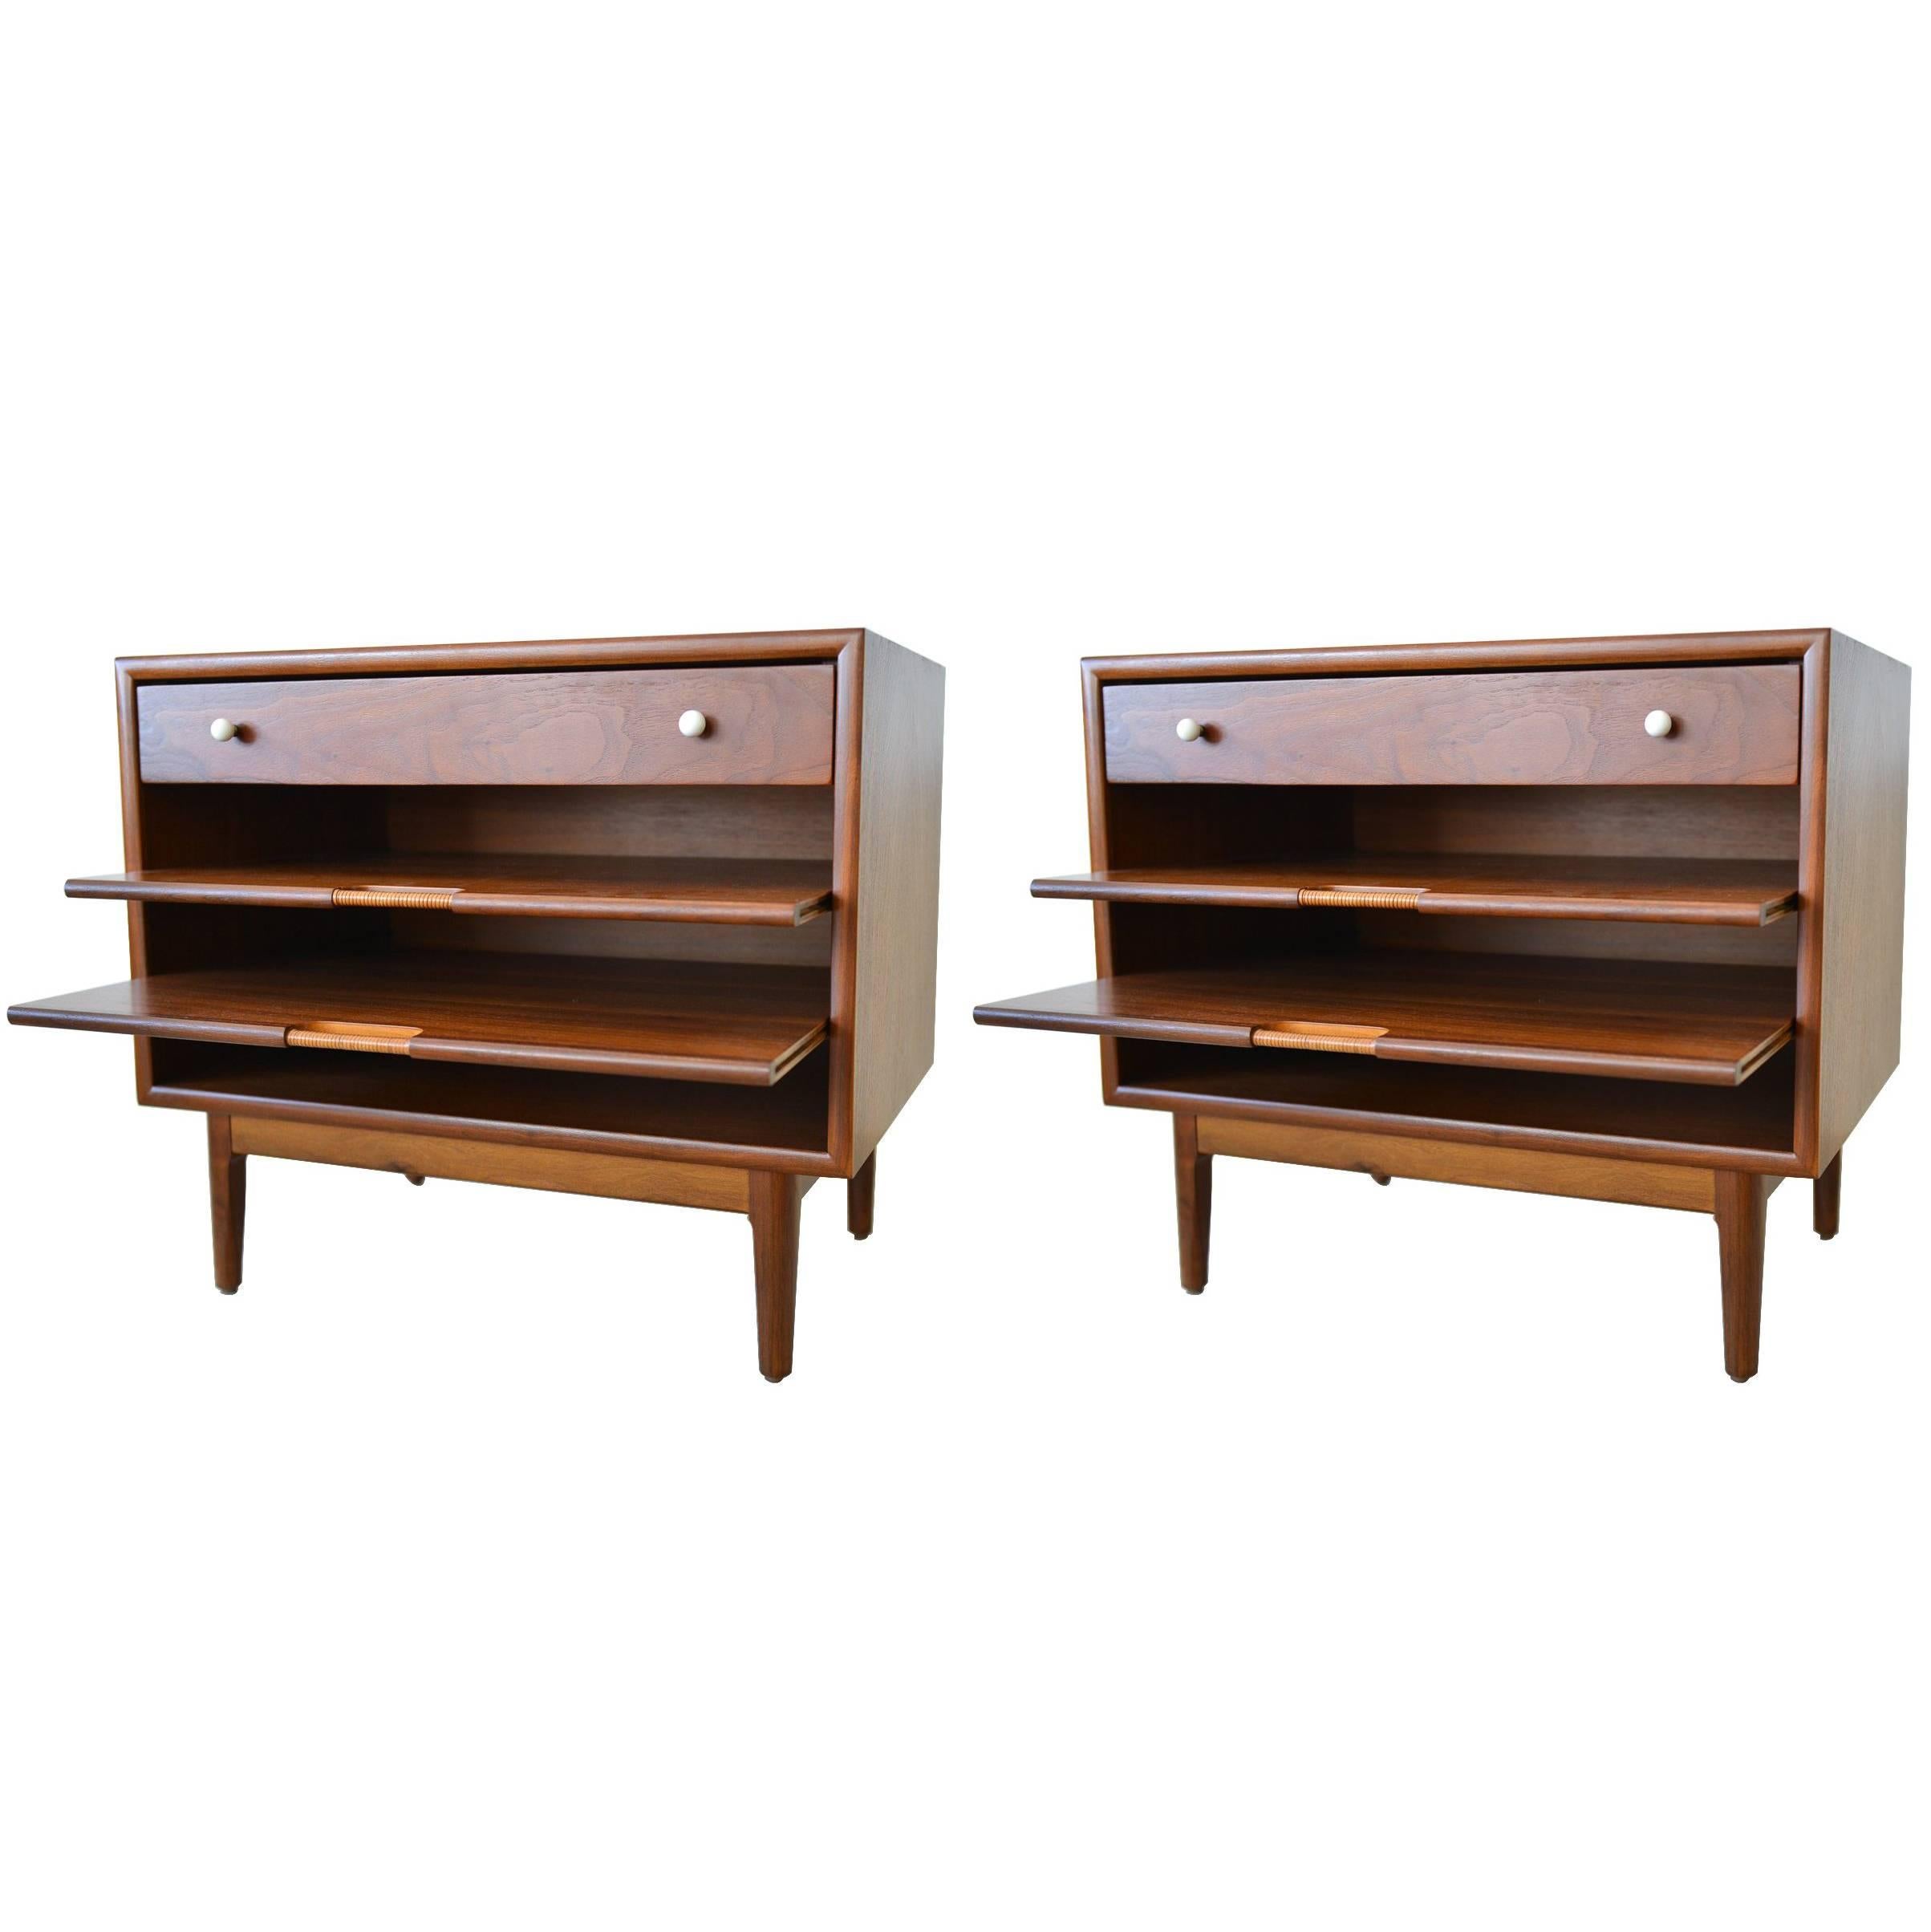 Pair of Kipp Stewart Nightstands with Pull Out Magazine Shelves, circa 1965